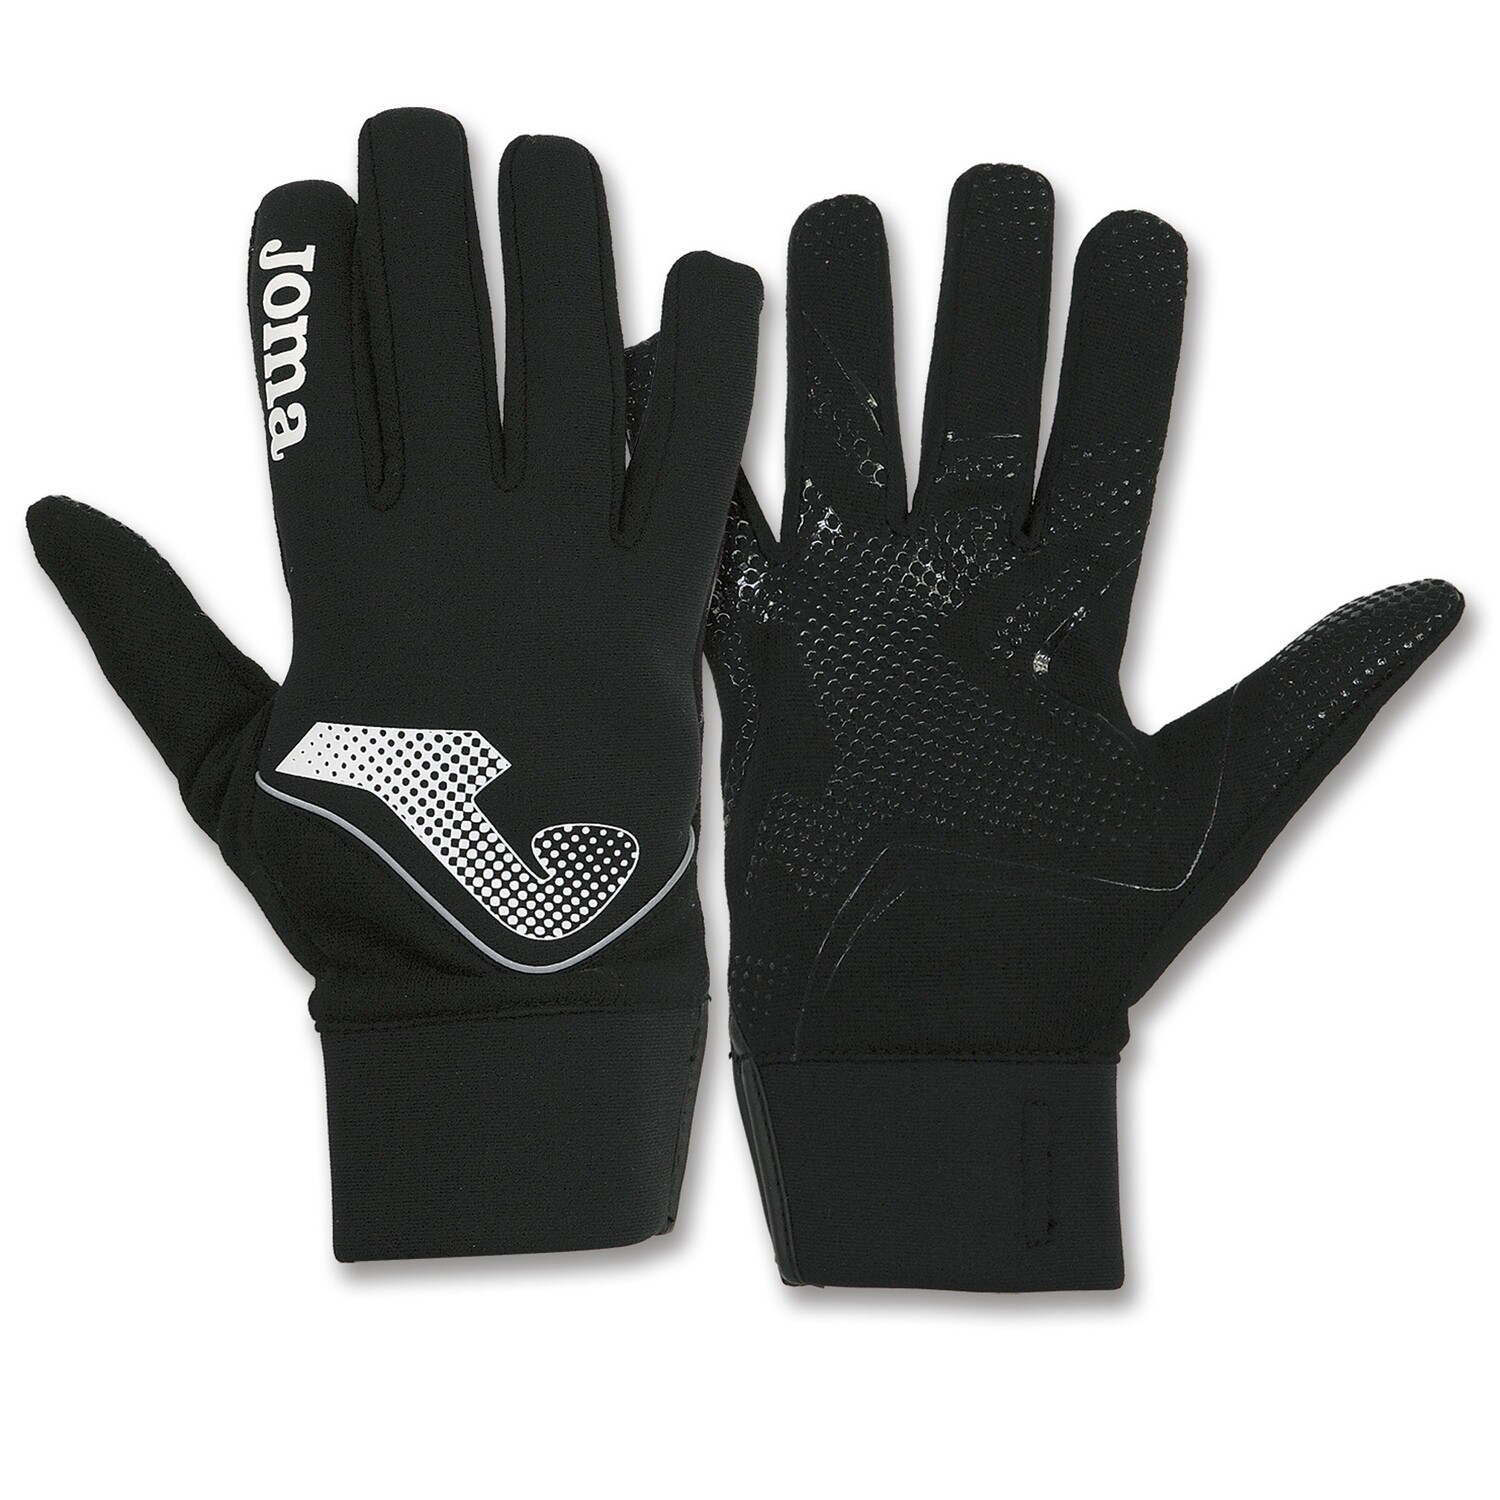 Football Players Glove by Joma